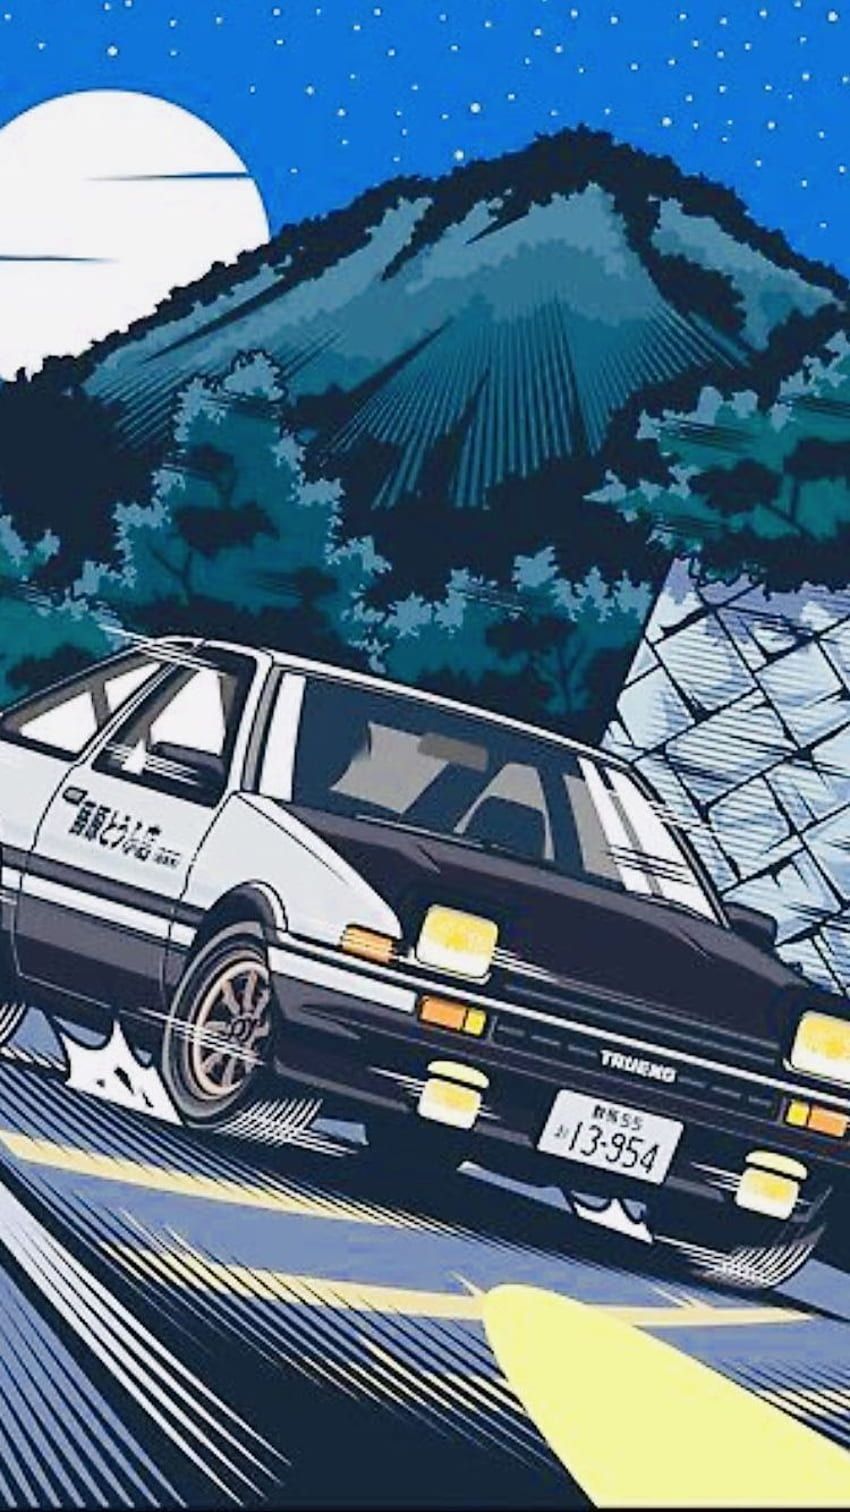 Initial D iPhone Wallpaper with high-resolution 1080x1920 pixel. You can use this wallpaper for your iPhone 5, 6, 7, 8, X, XS, XR backgrounds, Mobile Screensaver, or iPad Lock Screen - Toyota AE86